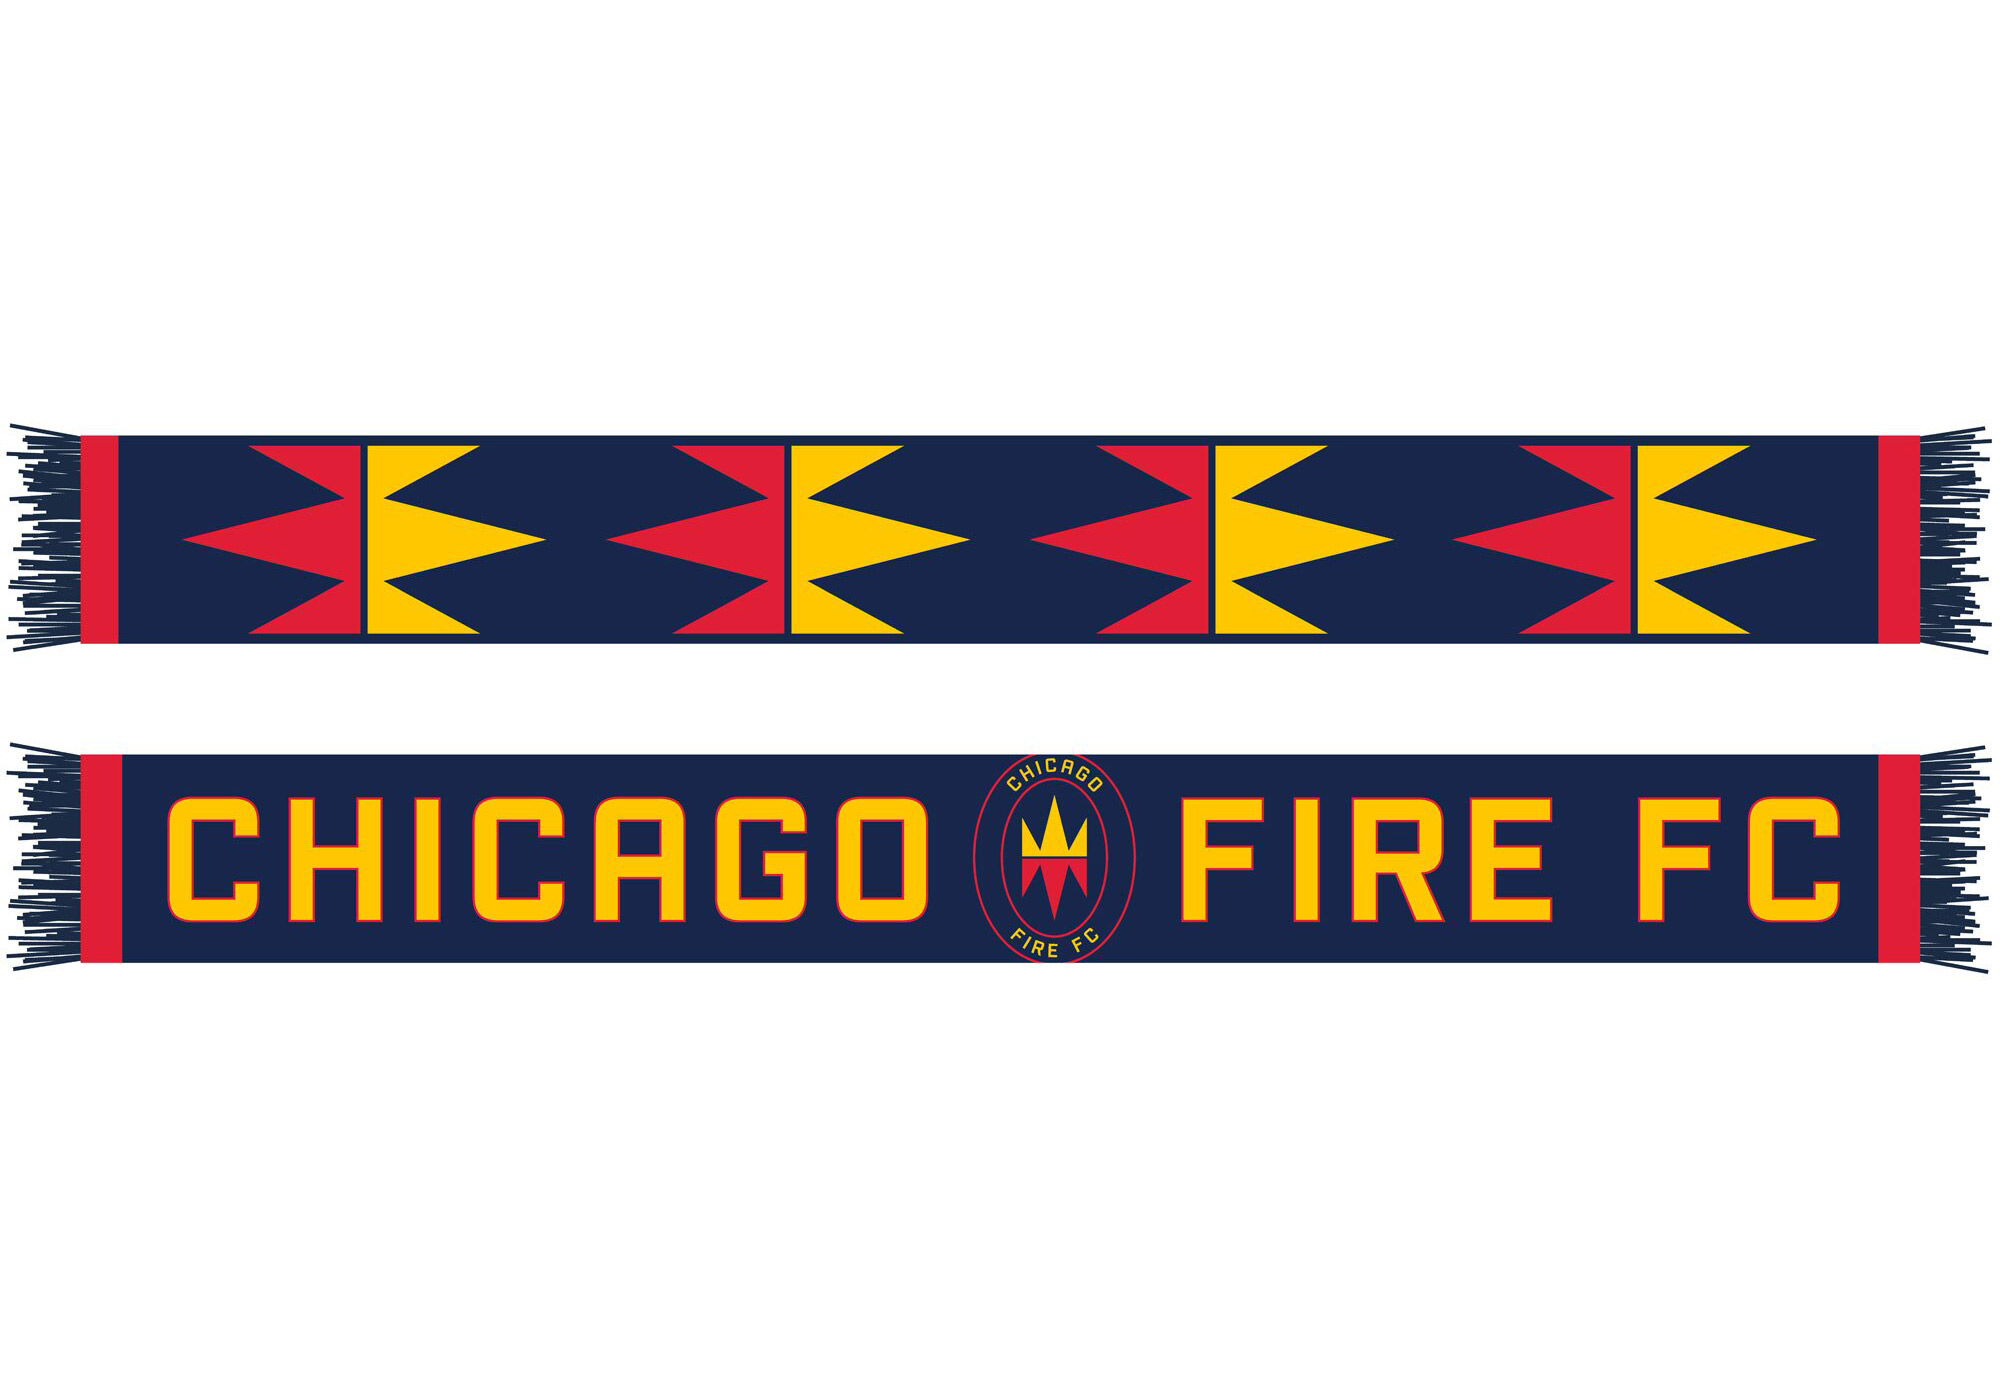 Chicago Fire FC – Scarf, Quelle: Chicago Fire FC